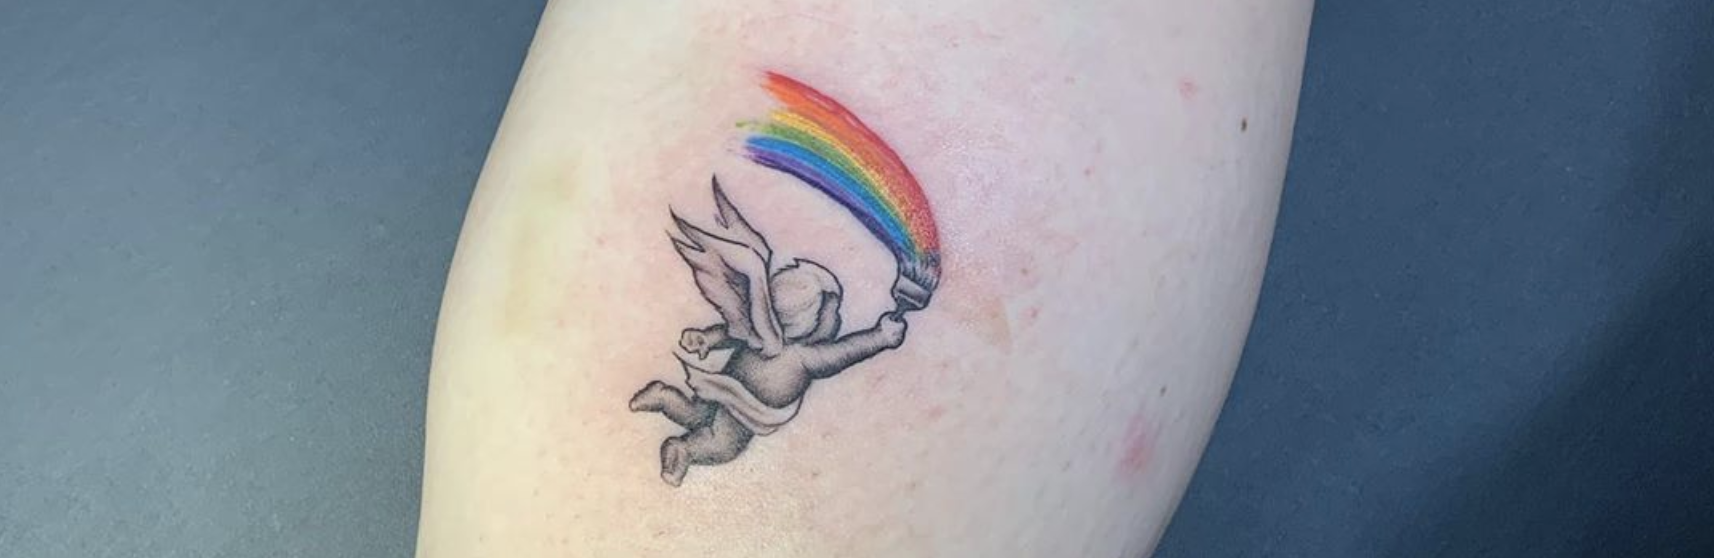 Miscarriage Tattoos A Unique Way To Memorialize Your Angel